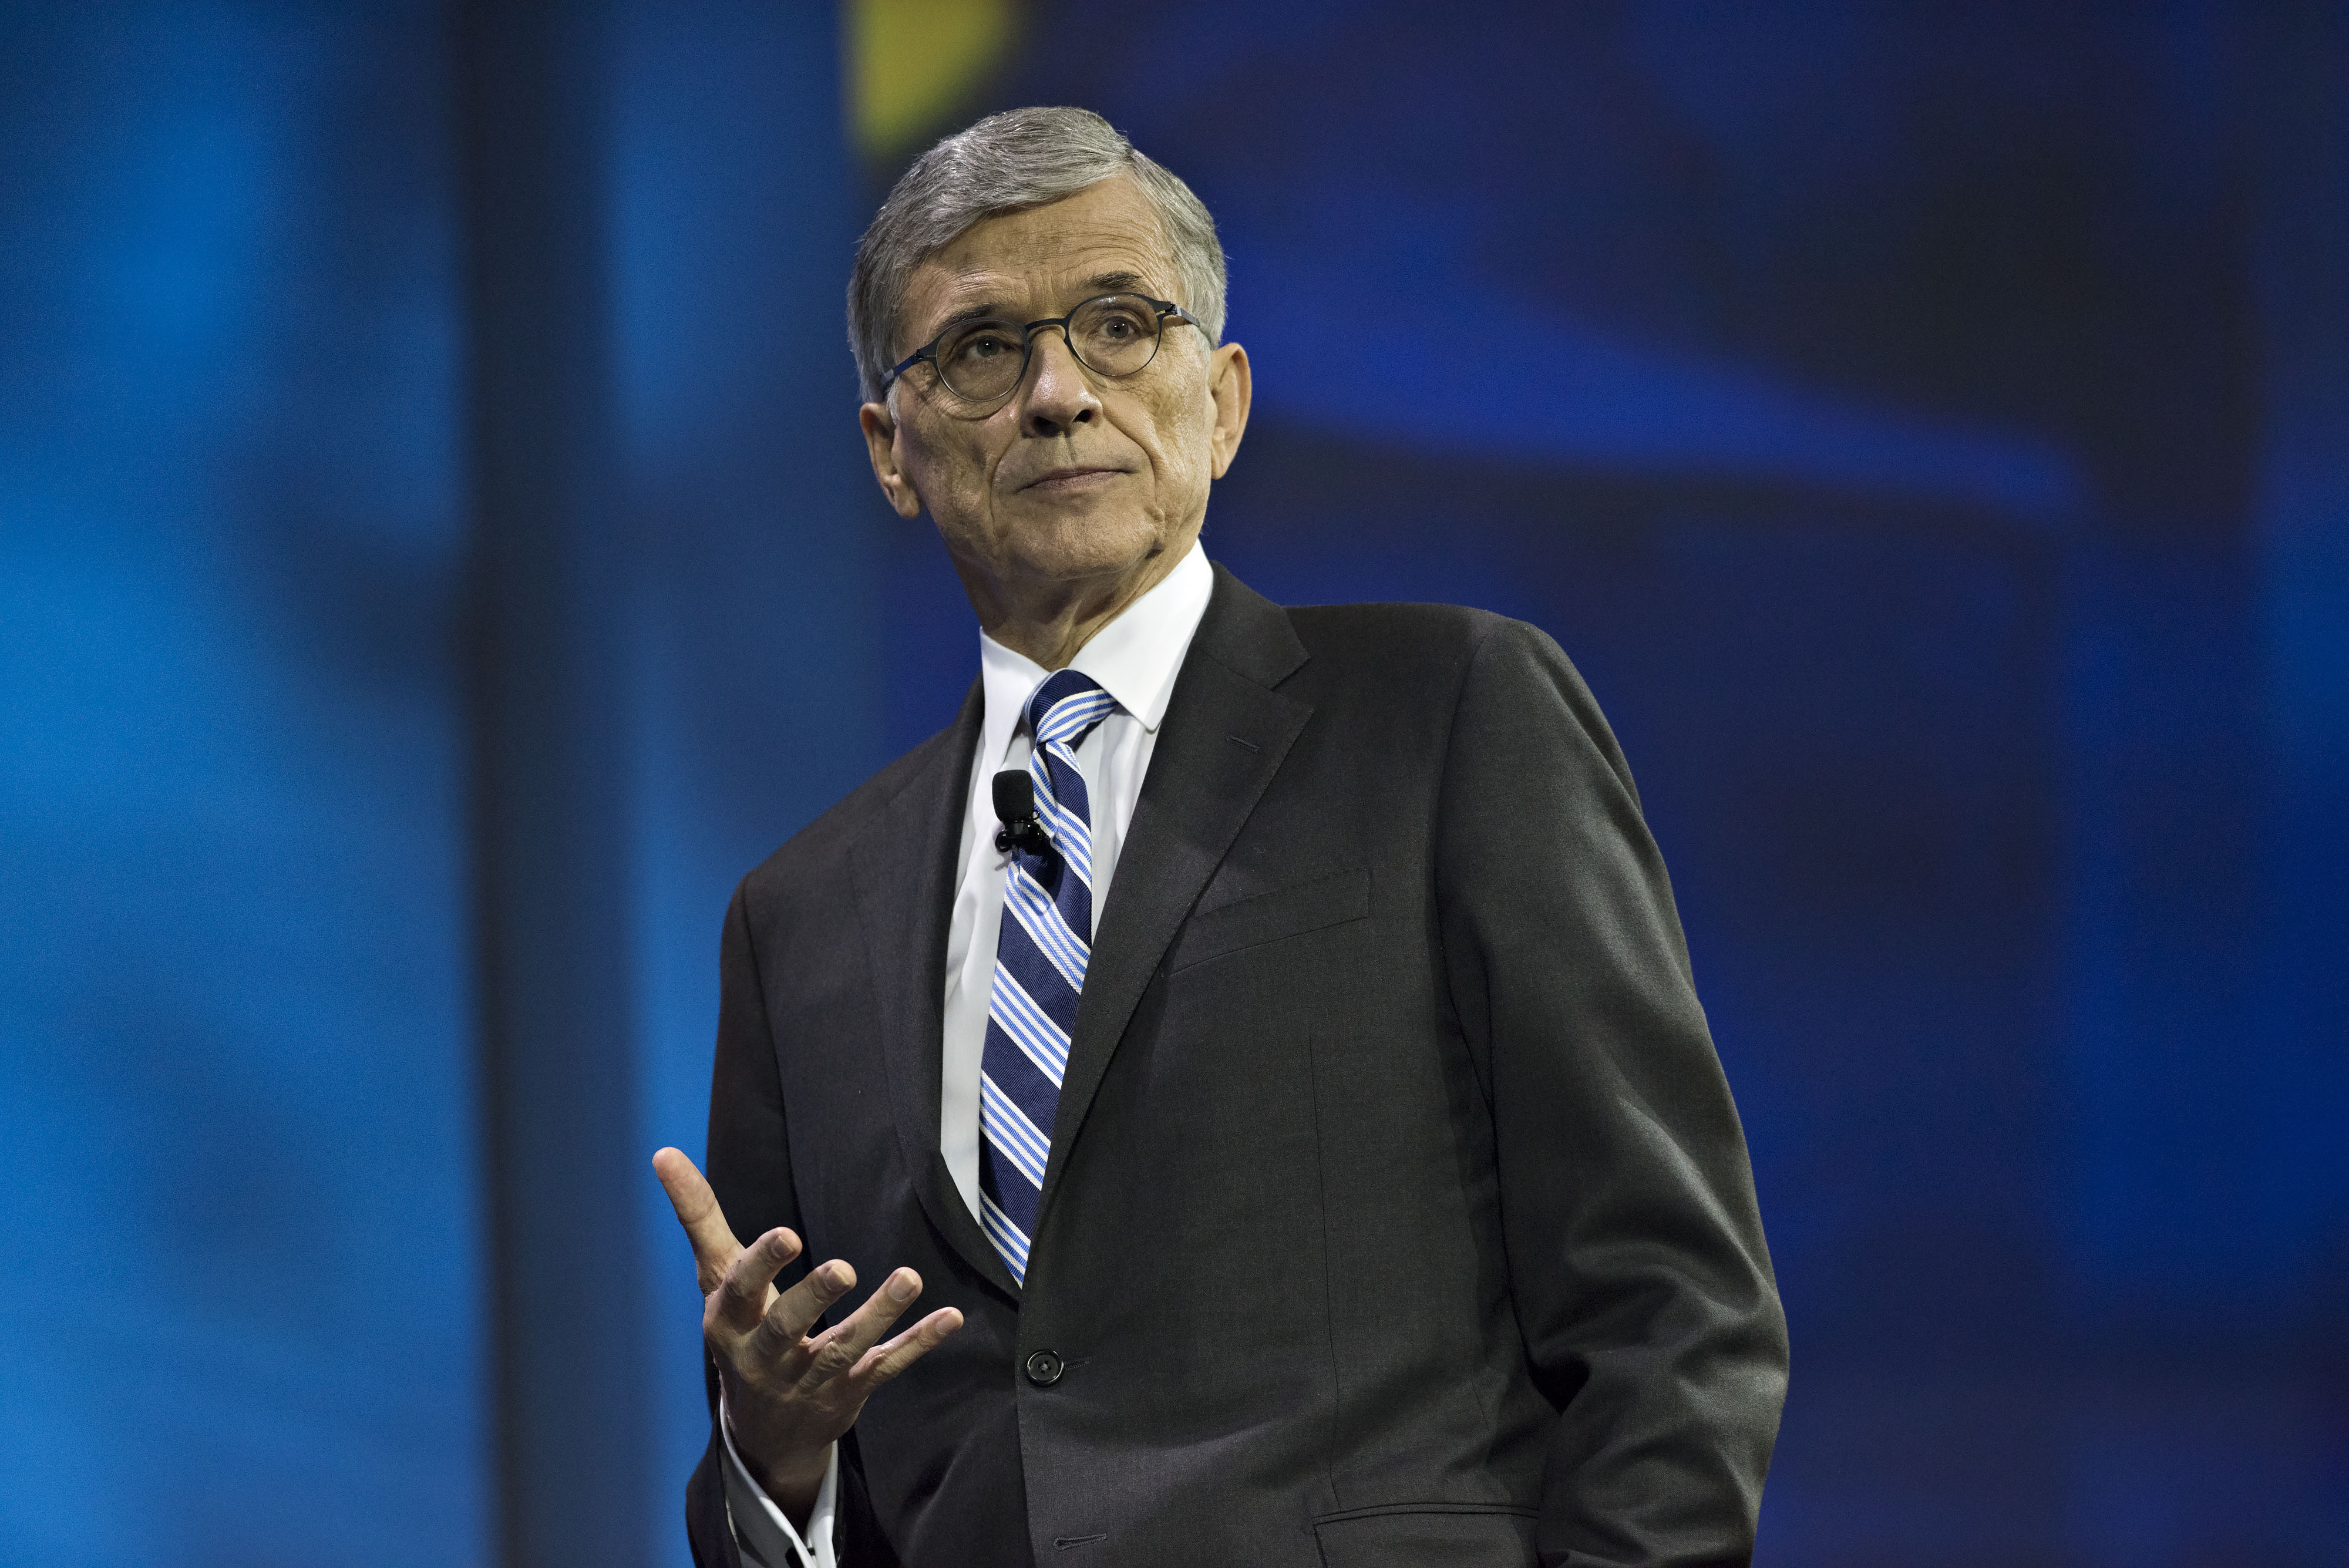 Thomas "Tom" Wheeler, chairman of the U.S. Federal Communications Commission (FCC), speaks at INTX: The Internet &amp; Television Expo in Chicago, Illinois, U.S., on Wednesday, May 6, 2015. (Bloomberg&mdash;Bloomberg via Getty Images)